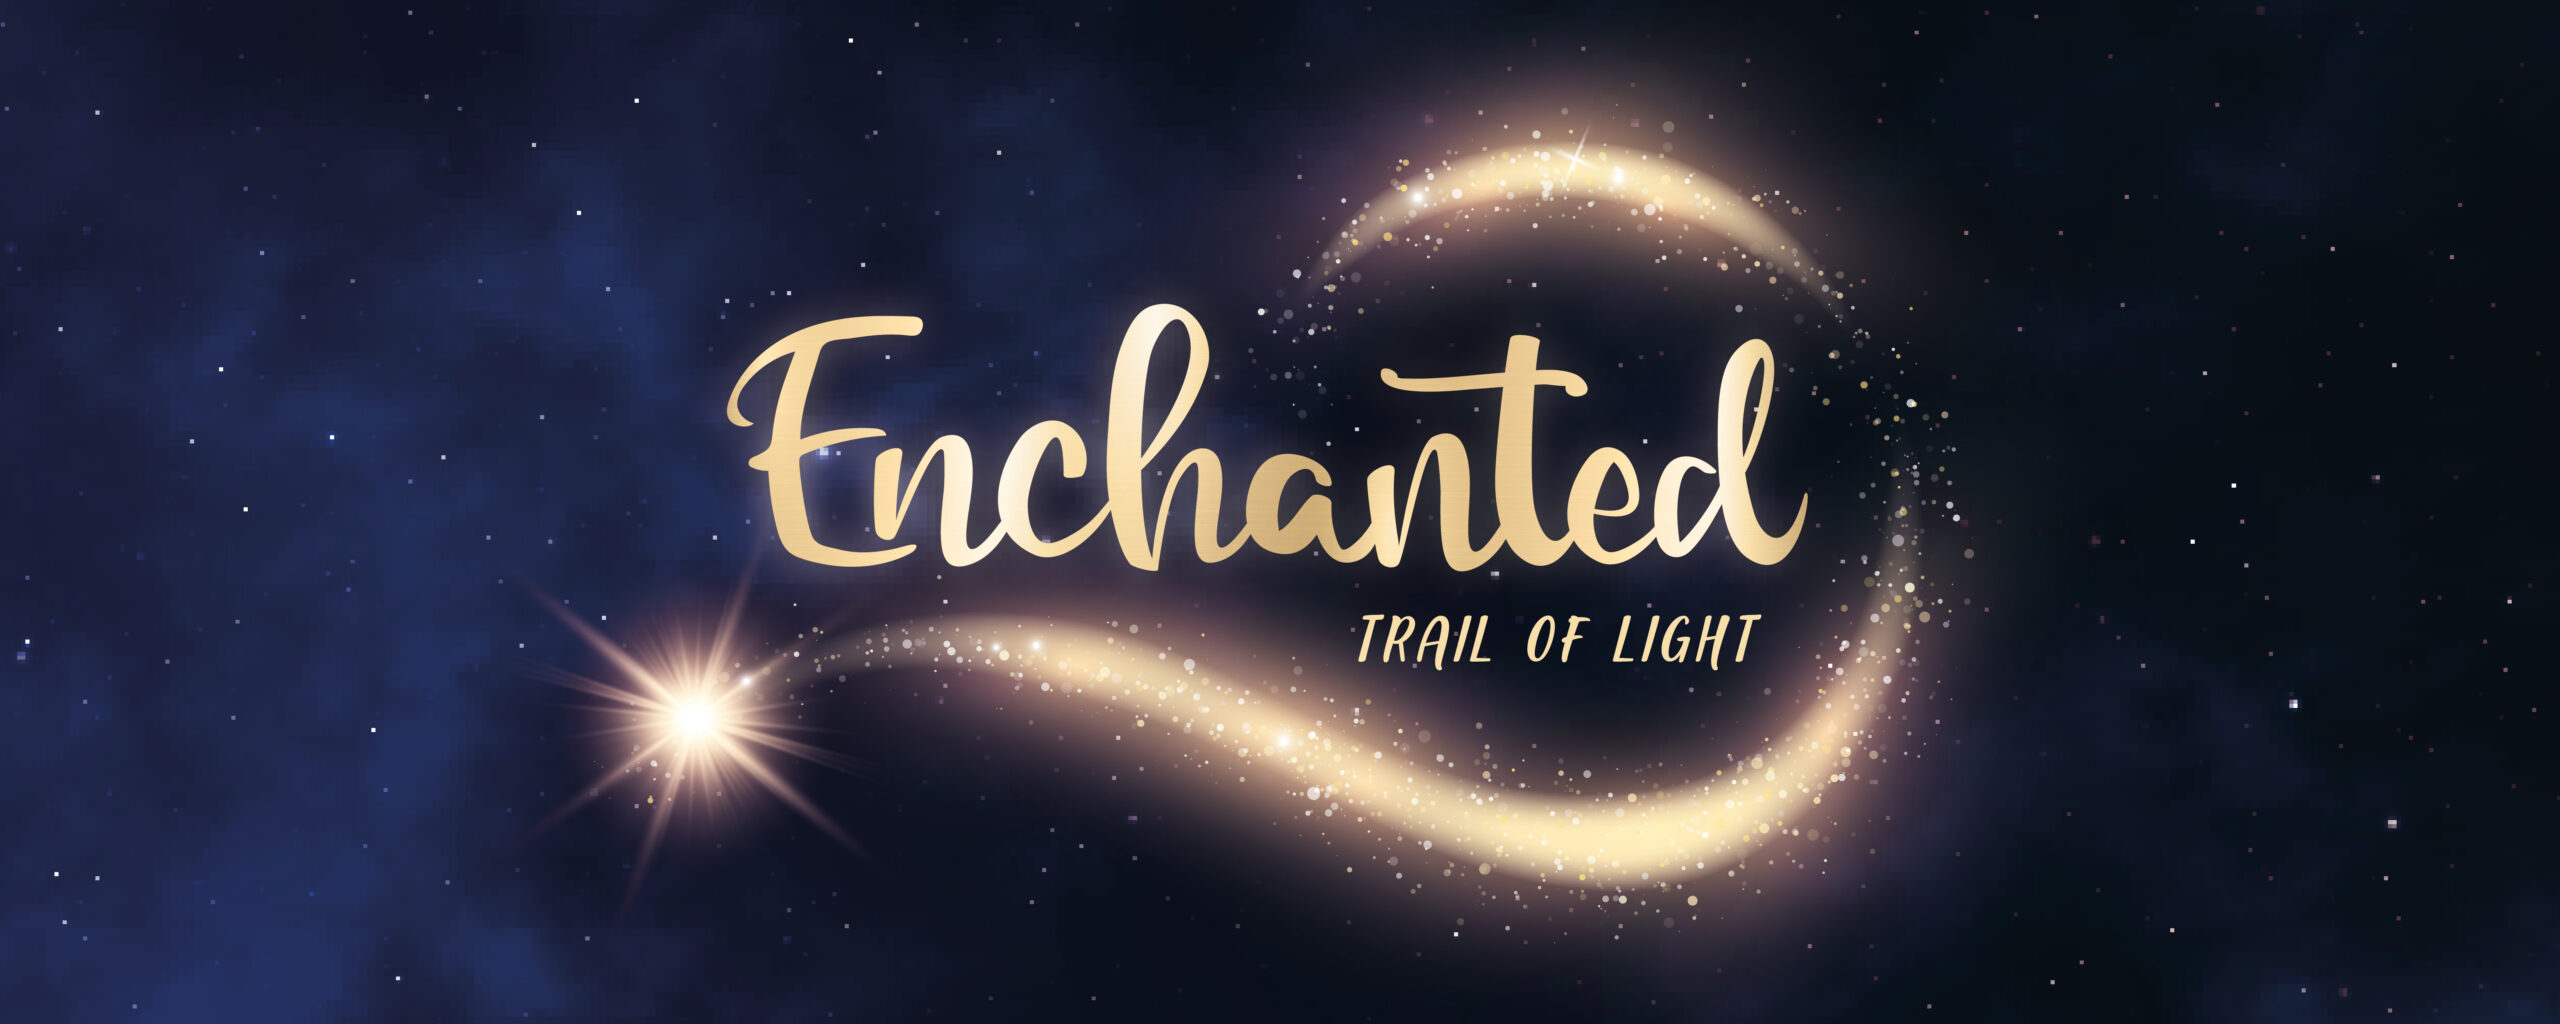 Enchanted – Trail of Light